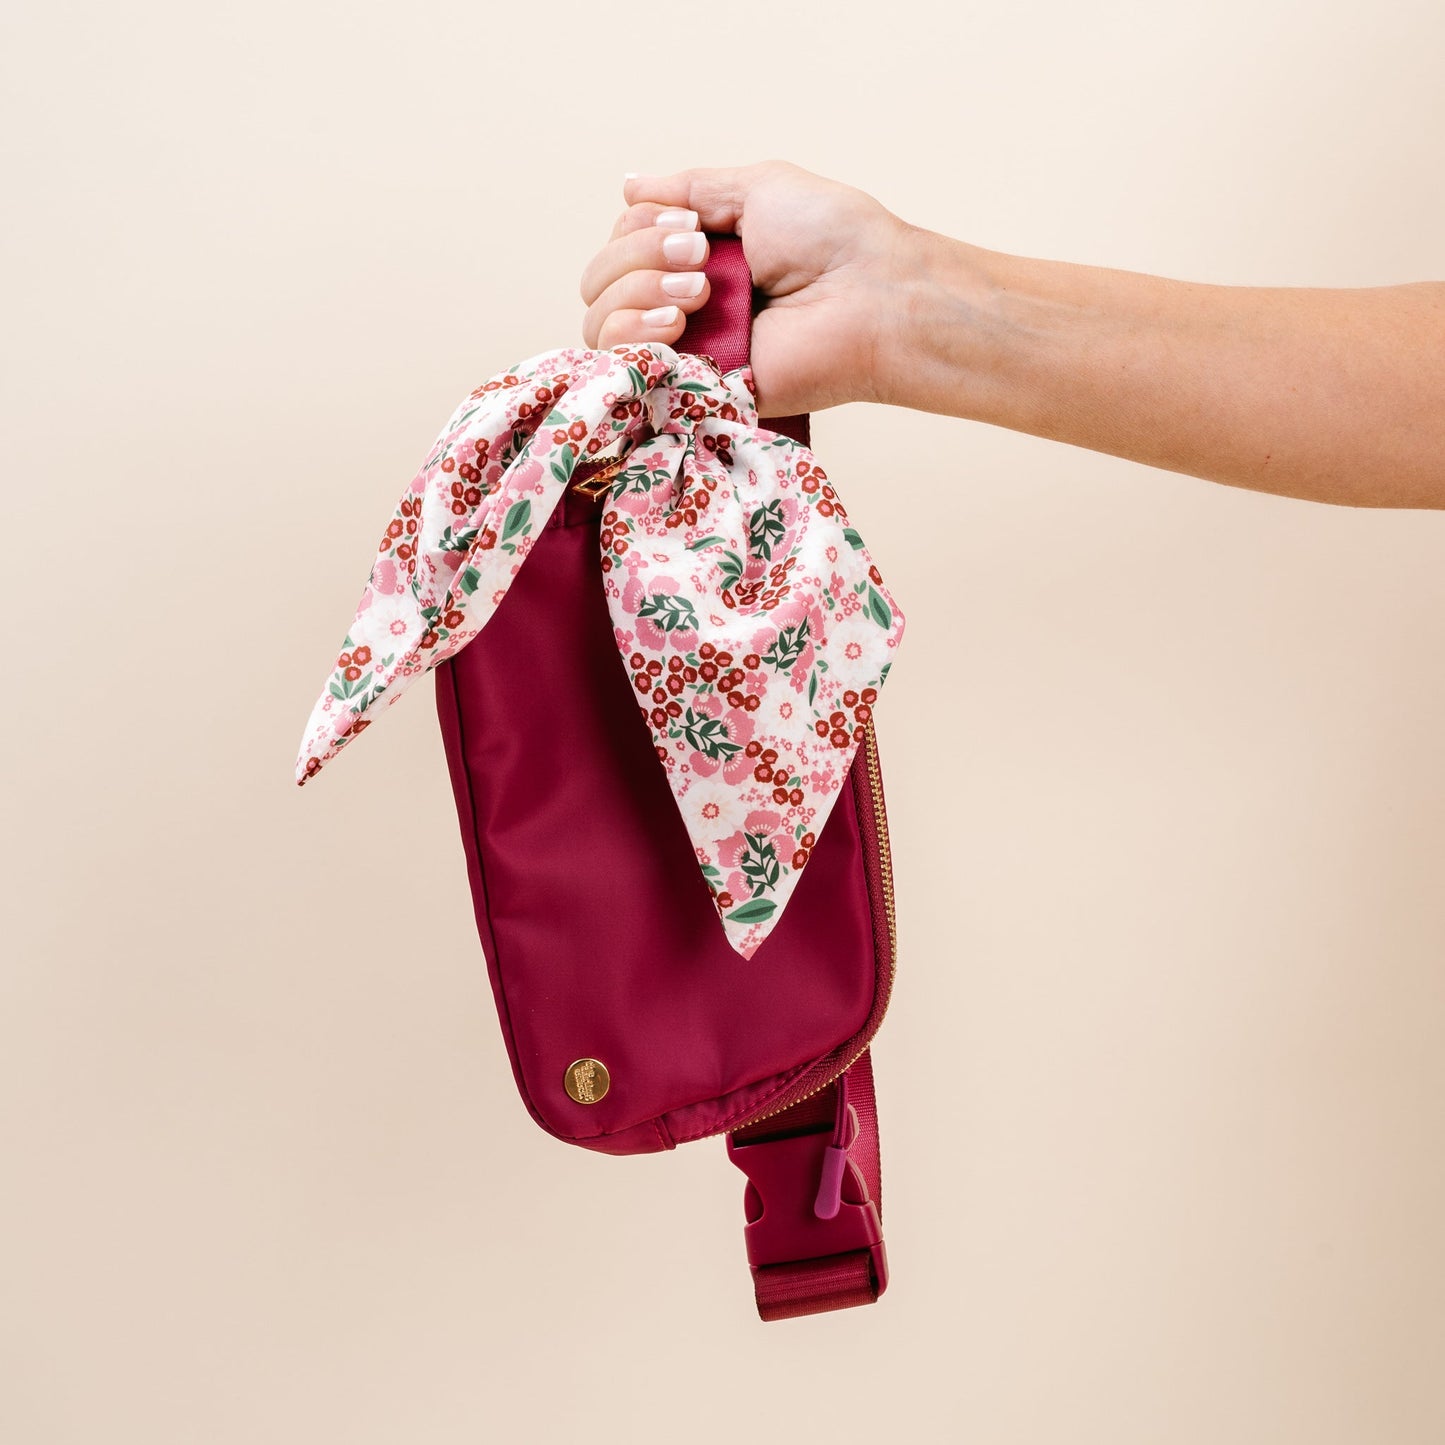 hand holding mulberry all your need bag by the strap on a blush pink background.